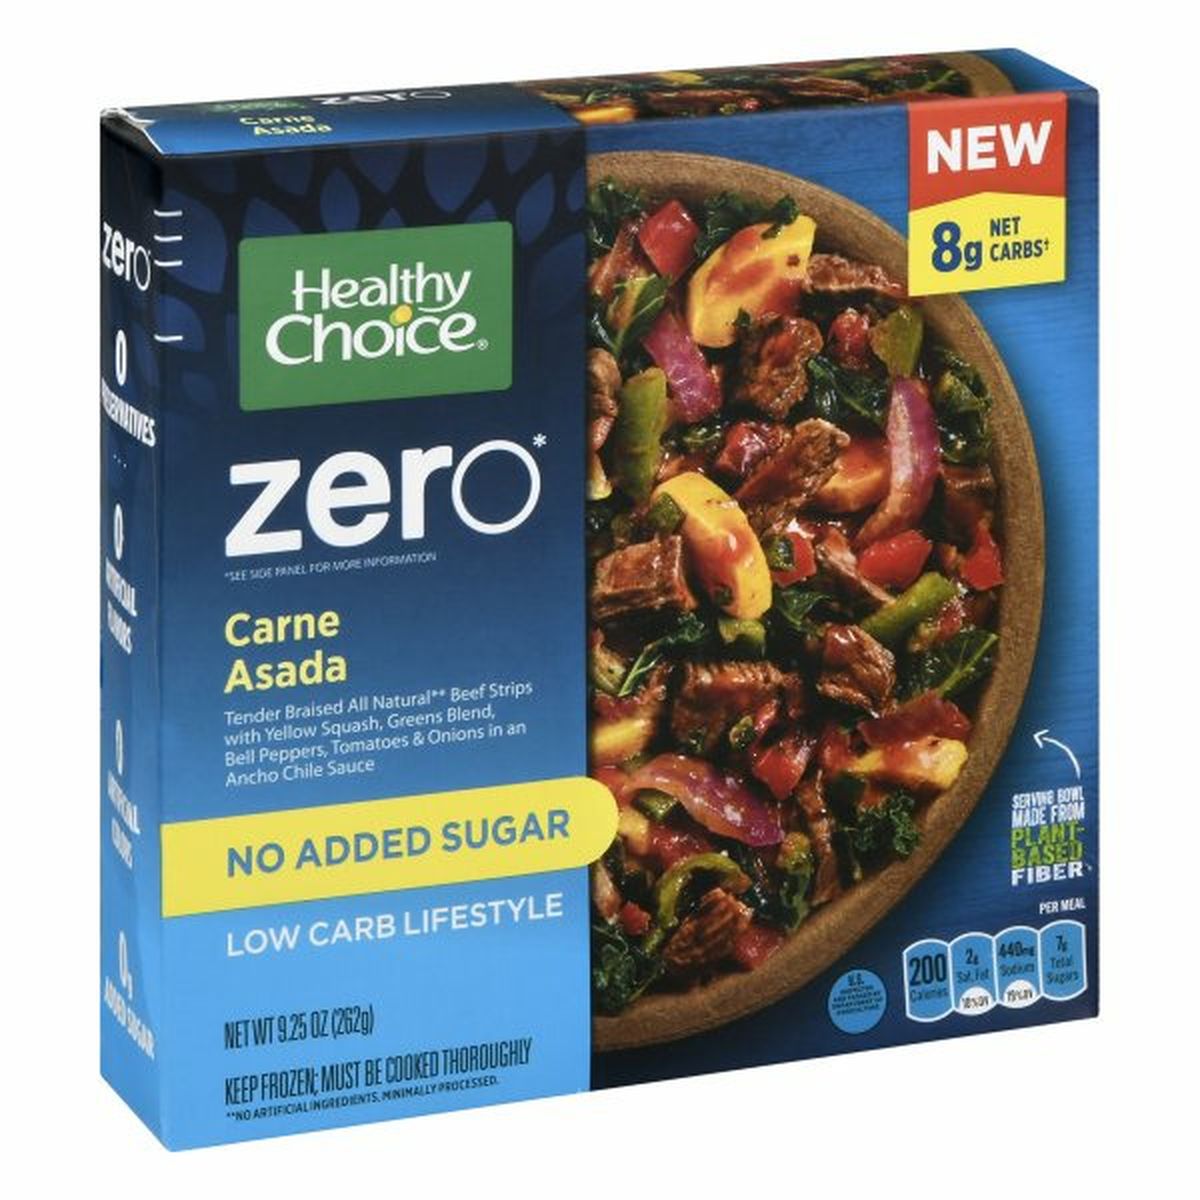 Calories in Healthy Choice Zero Carne Asada, No Sugar Added, Low Carb Lifestyle